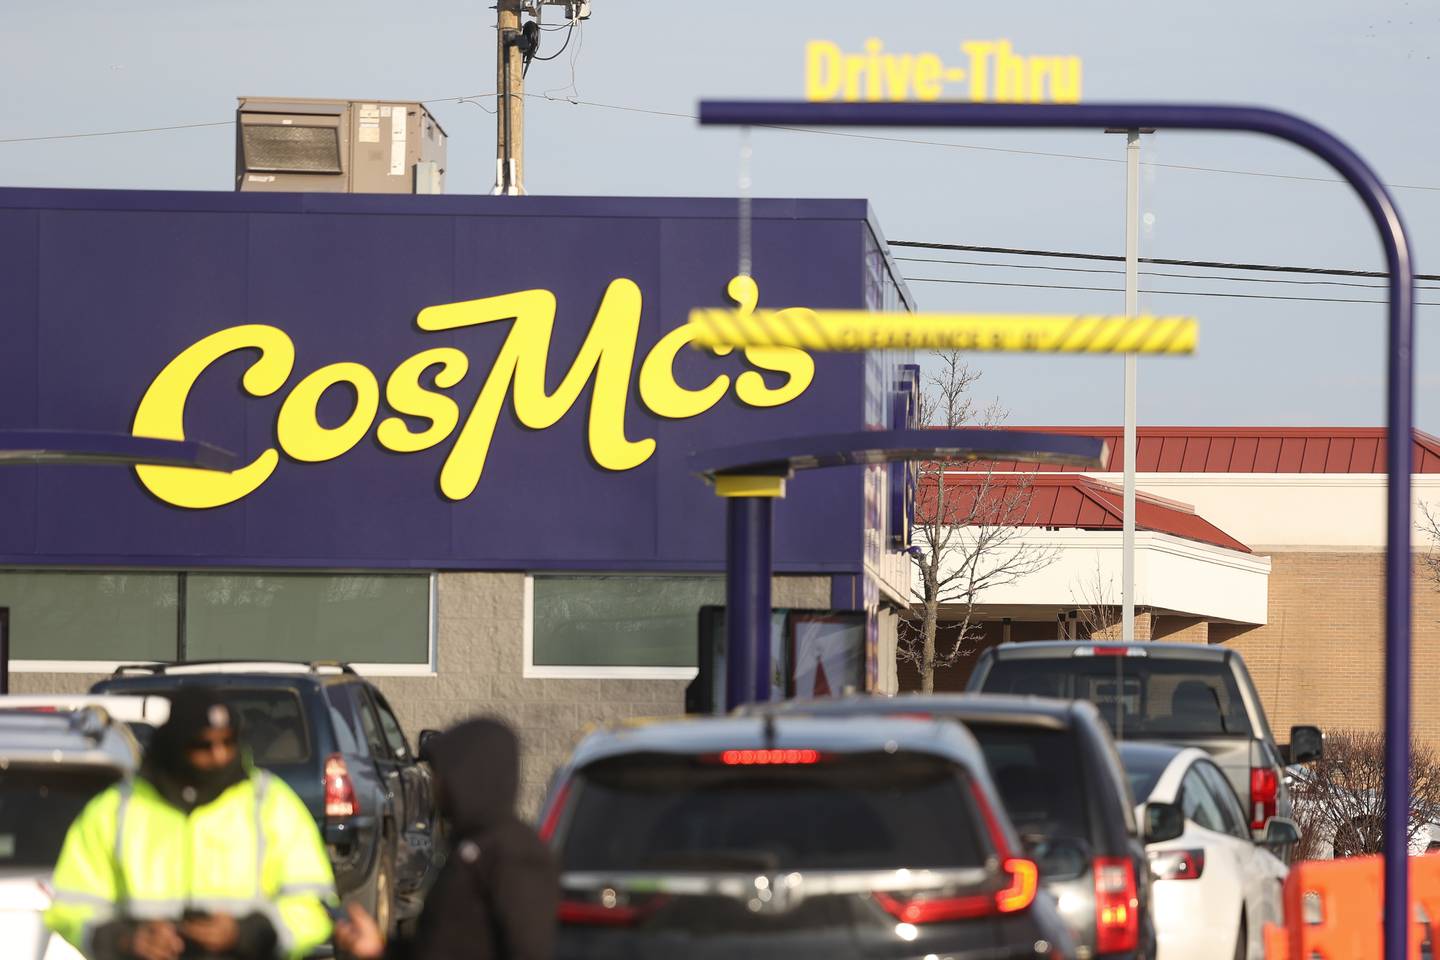 Vehicles pull up to CosMc’s, McDonald’s first small format beverage driven concept drive-thru restaurant, on Friday, Dec. 8, 2023, in Bolingbrook.